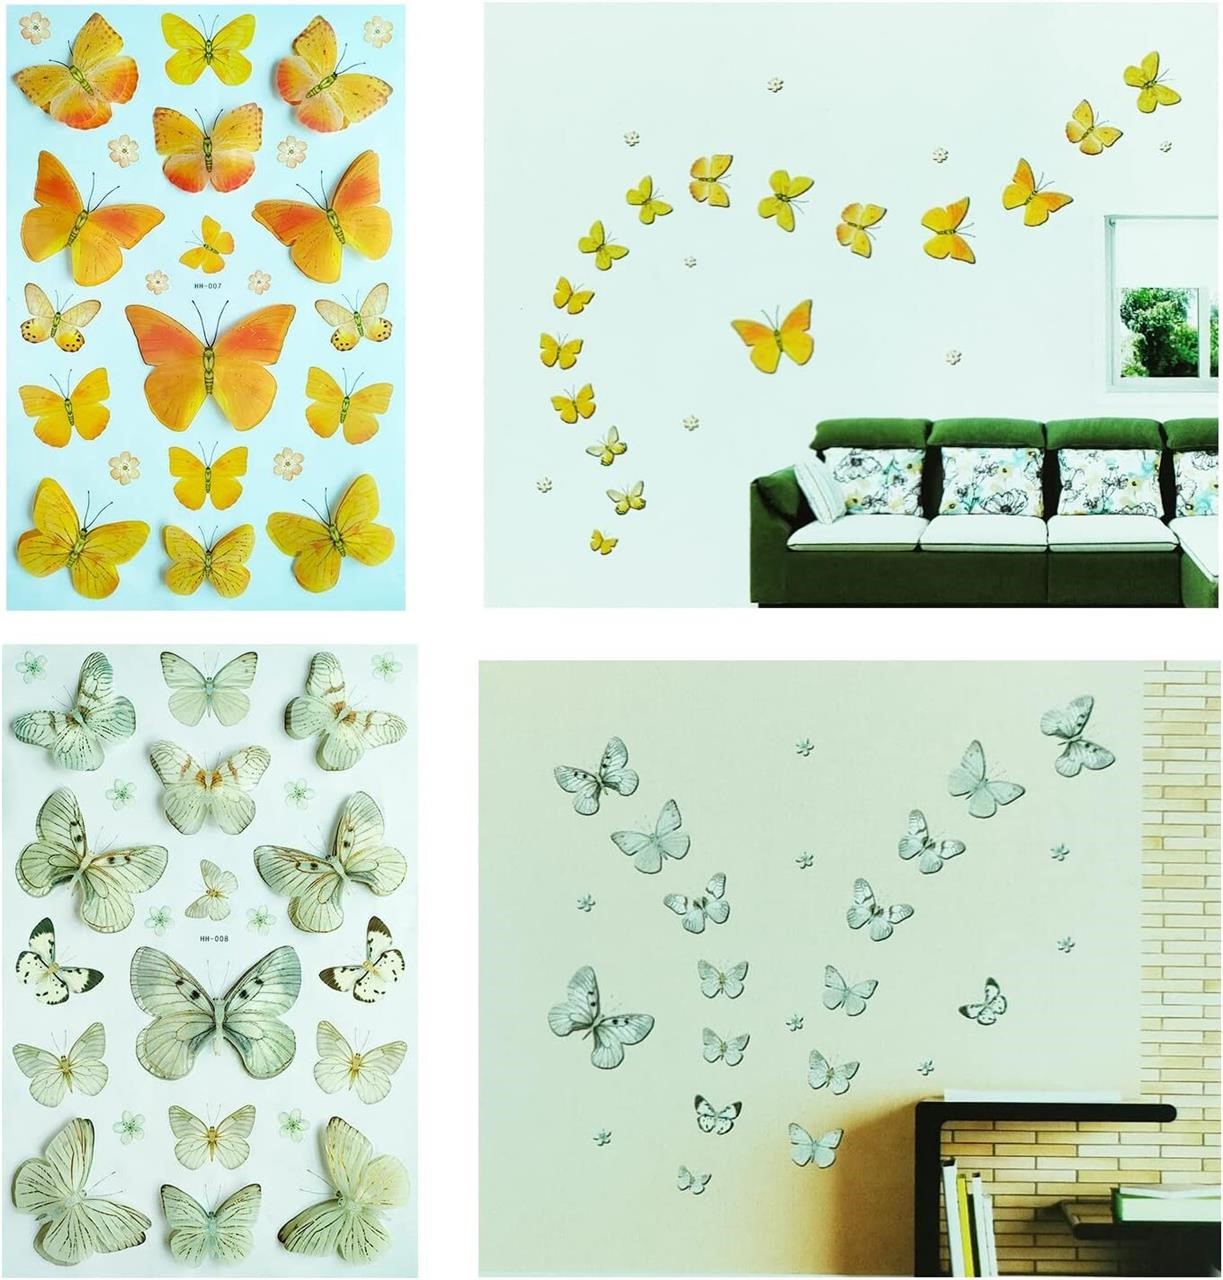 Butterfly Wall Stickers 2 packs of 24 each